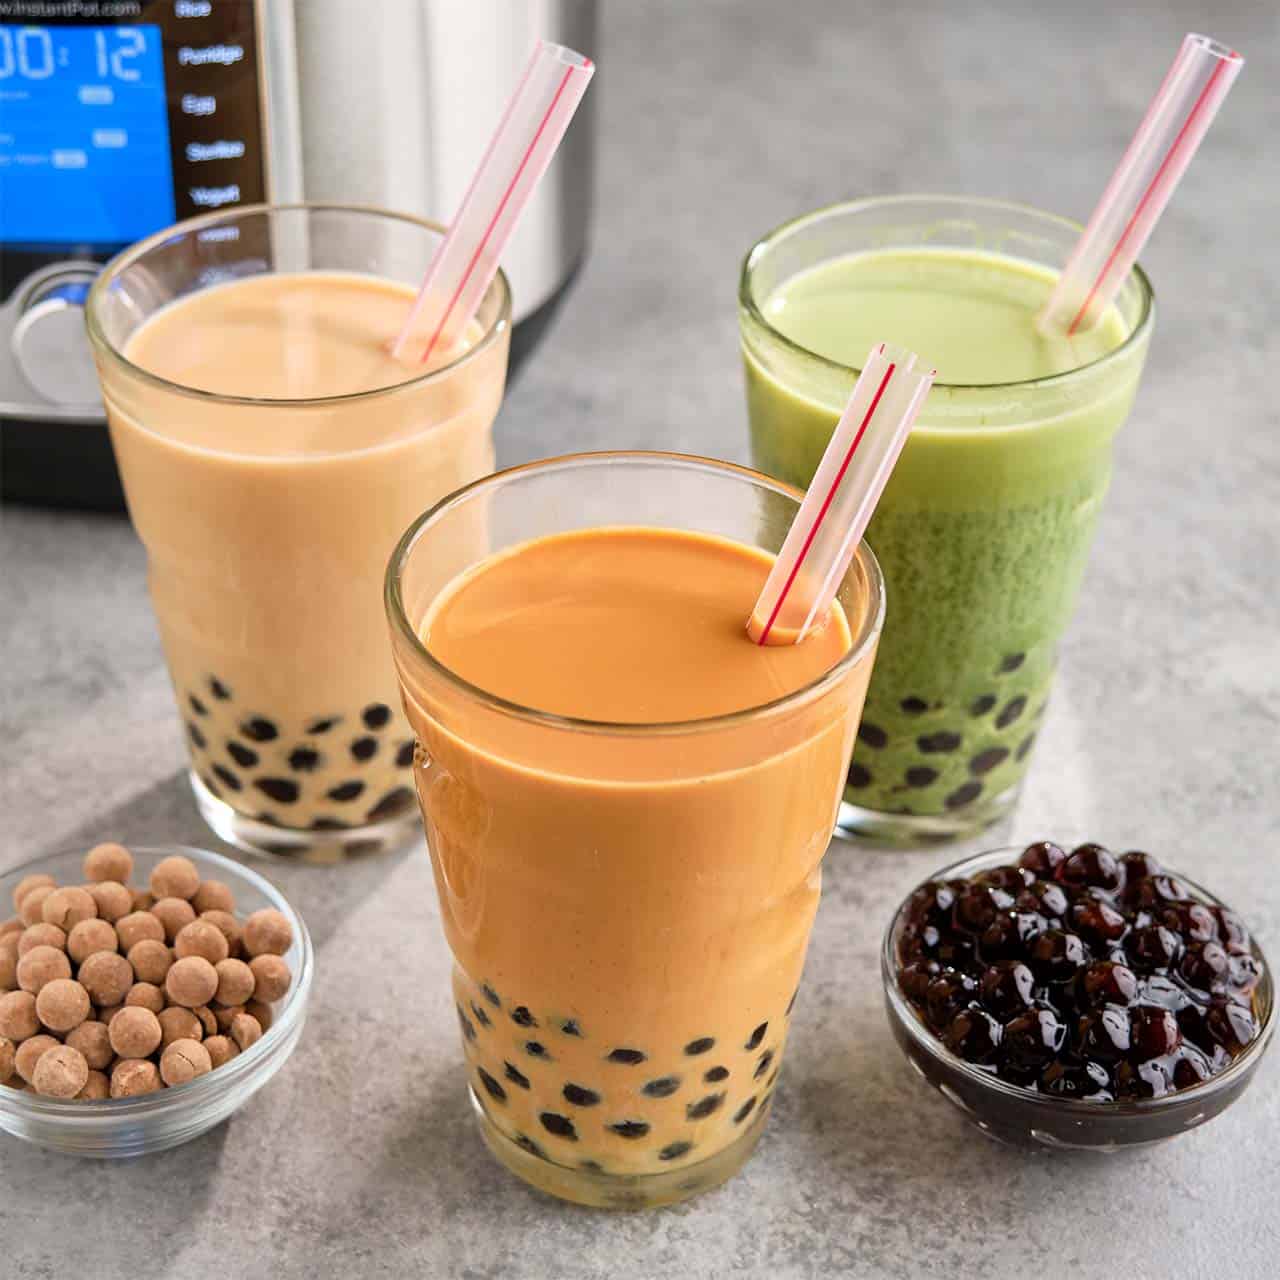 Three colorful glasses of boba tea, with cooked and uncooked boba pearls in dishes, and an Instant Pot in the background.